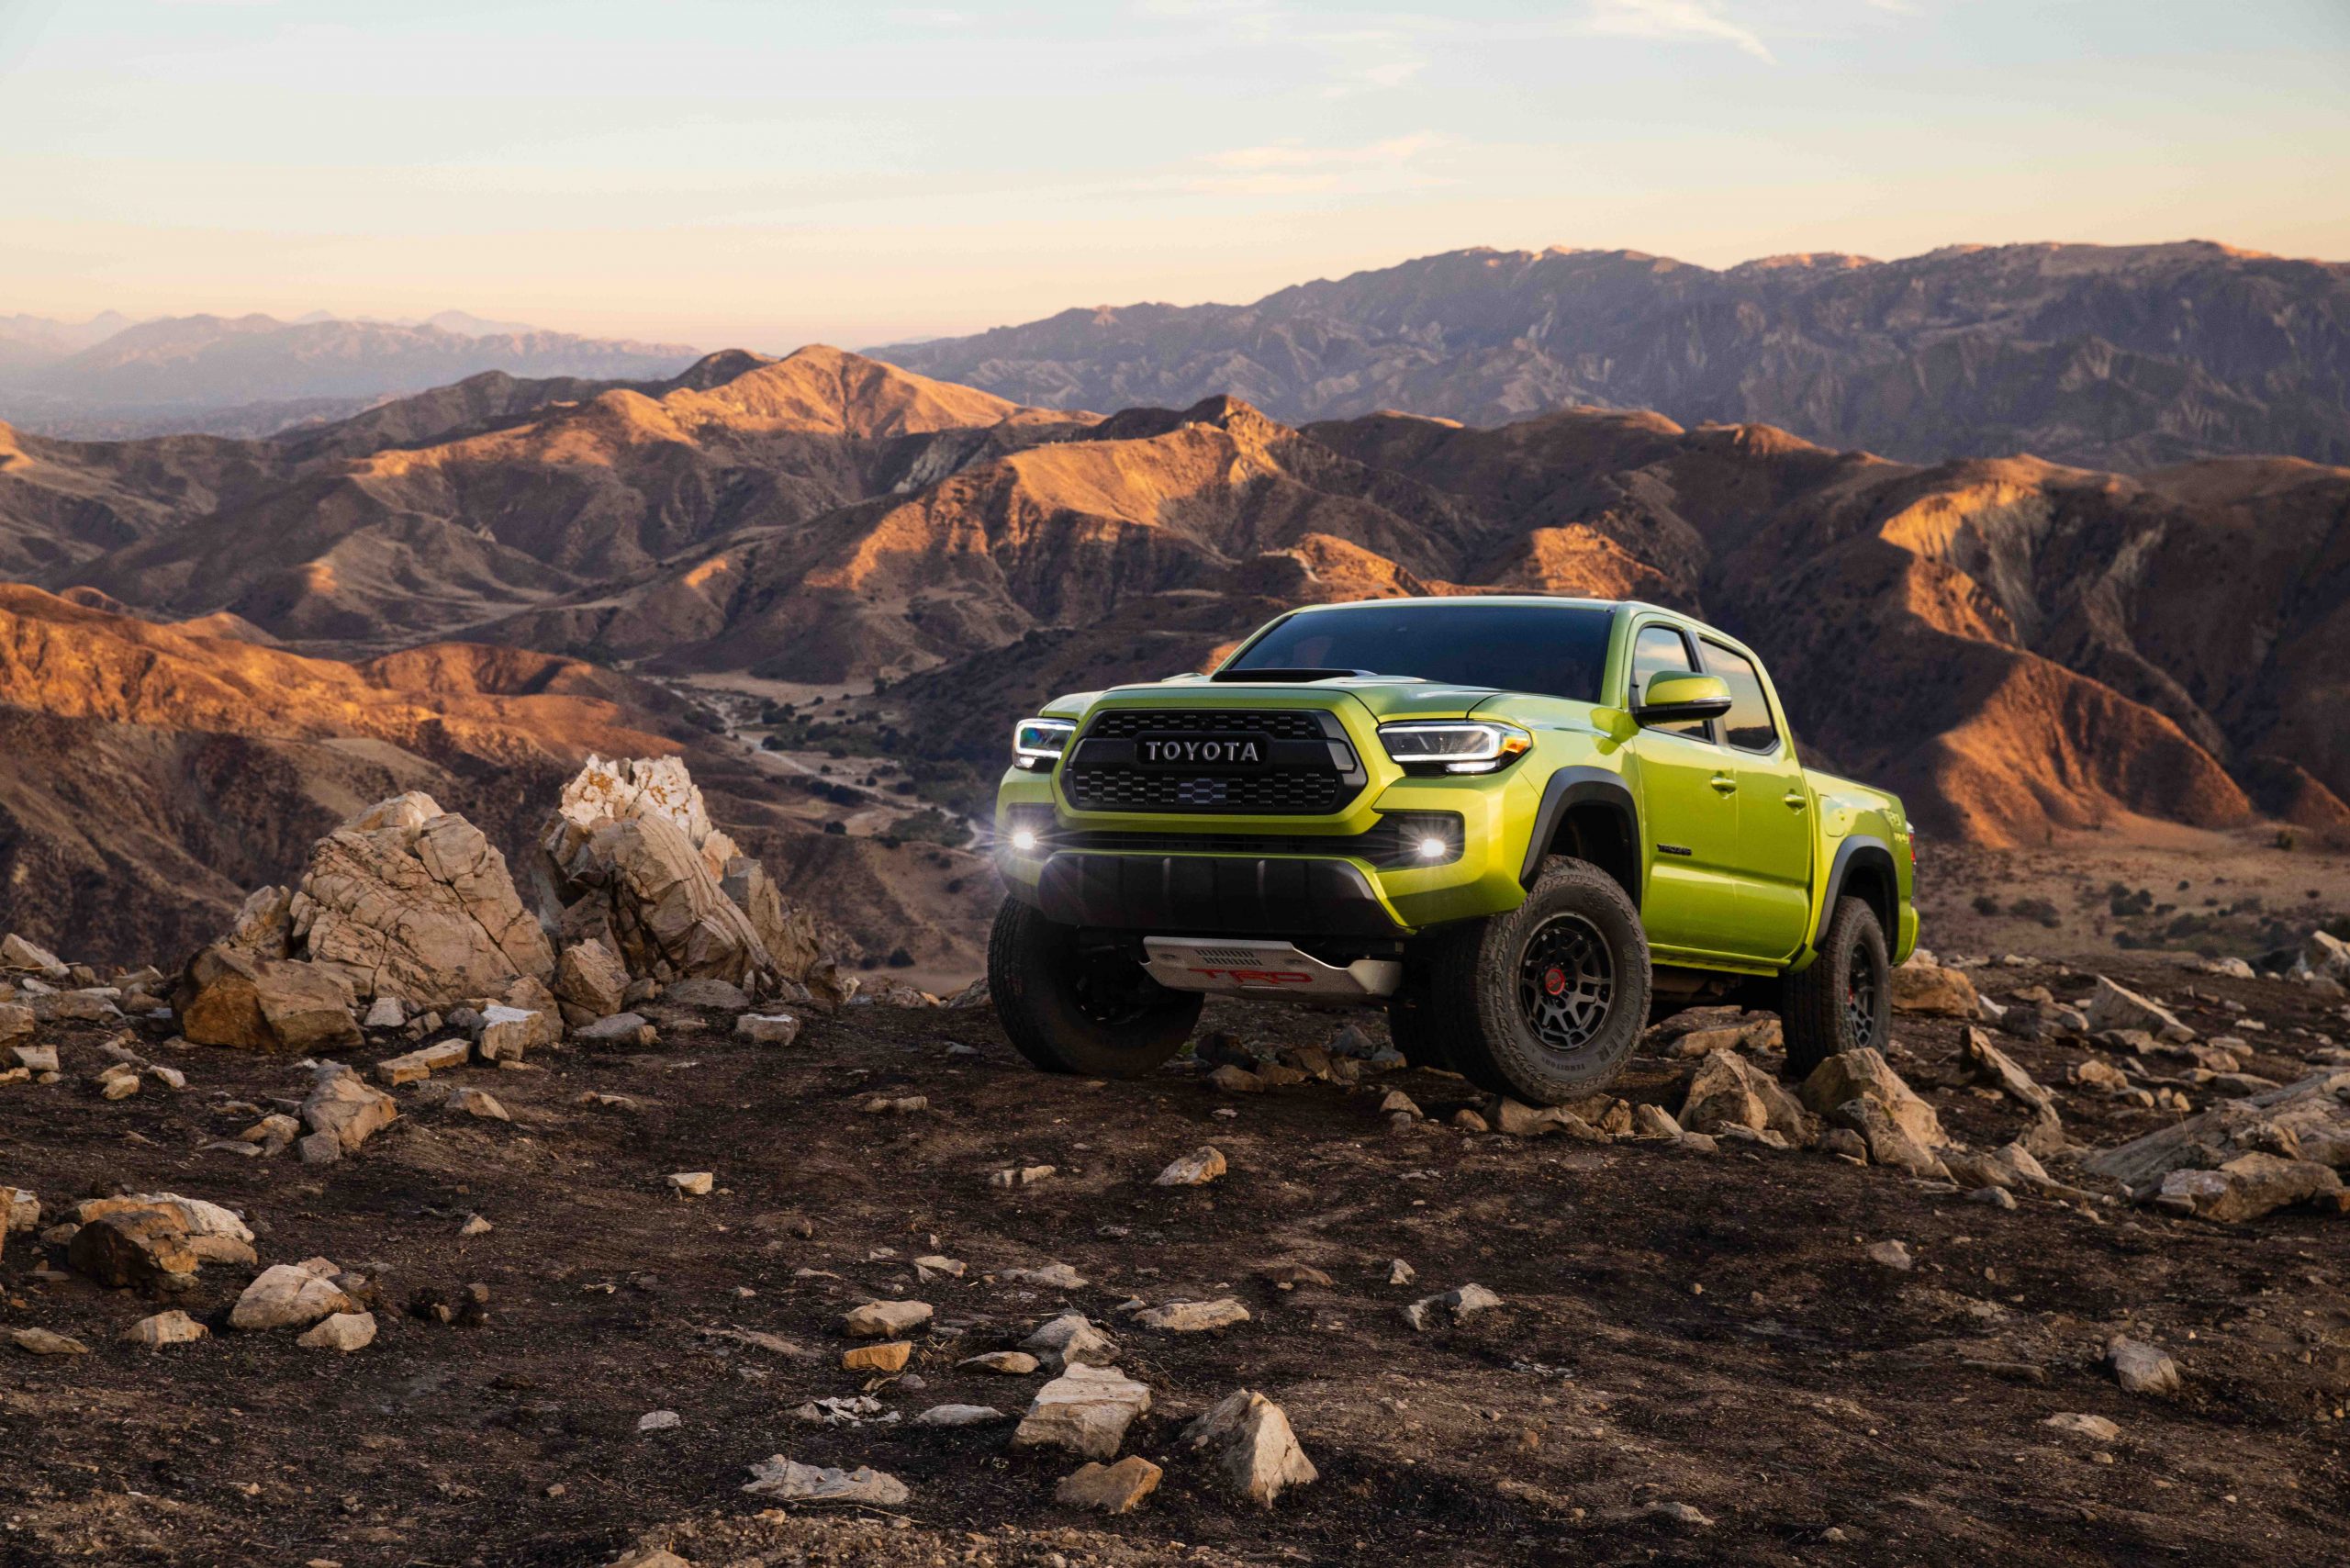 Next Generation Taa Trd Pro Takes Off Road Performance Up A